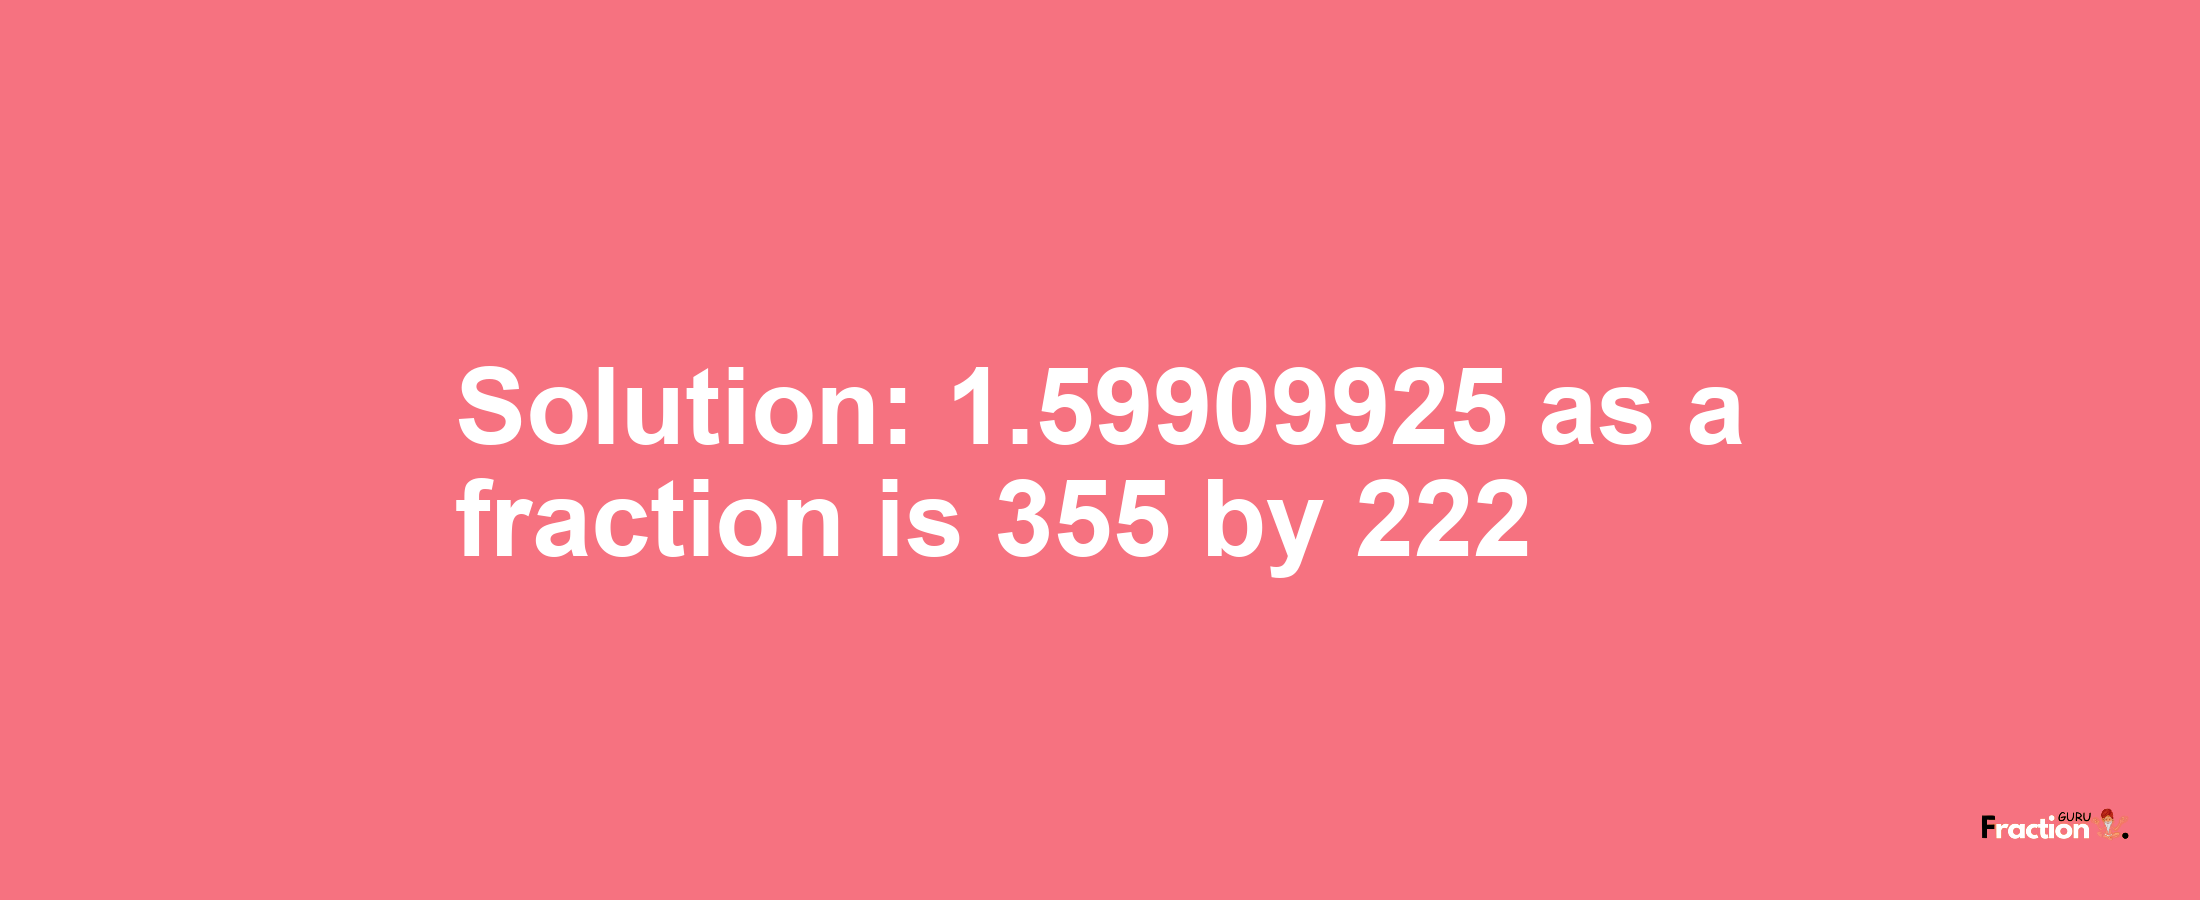 Solution:1.59909925 as a fraction is 355/222